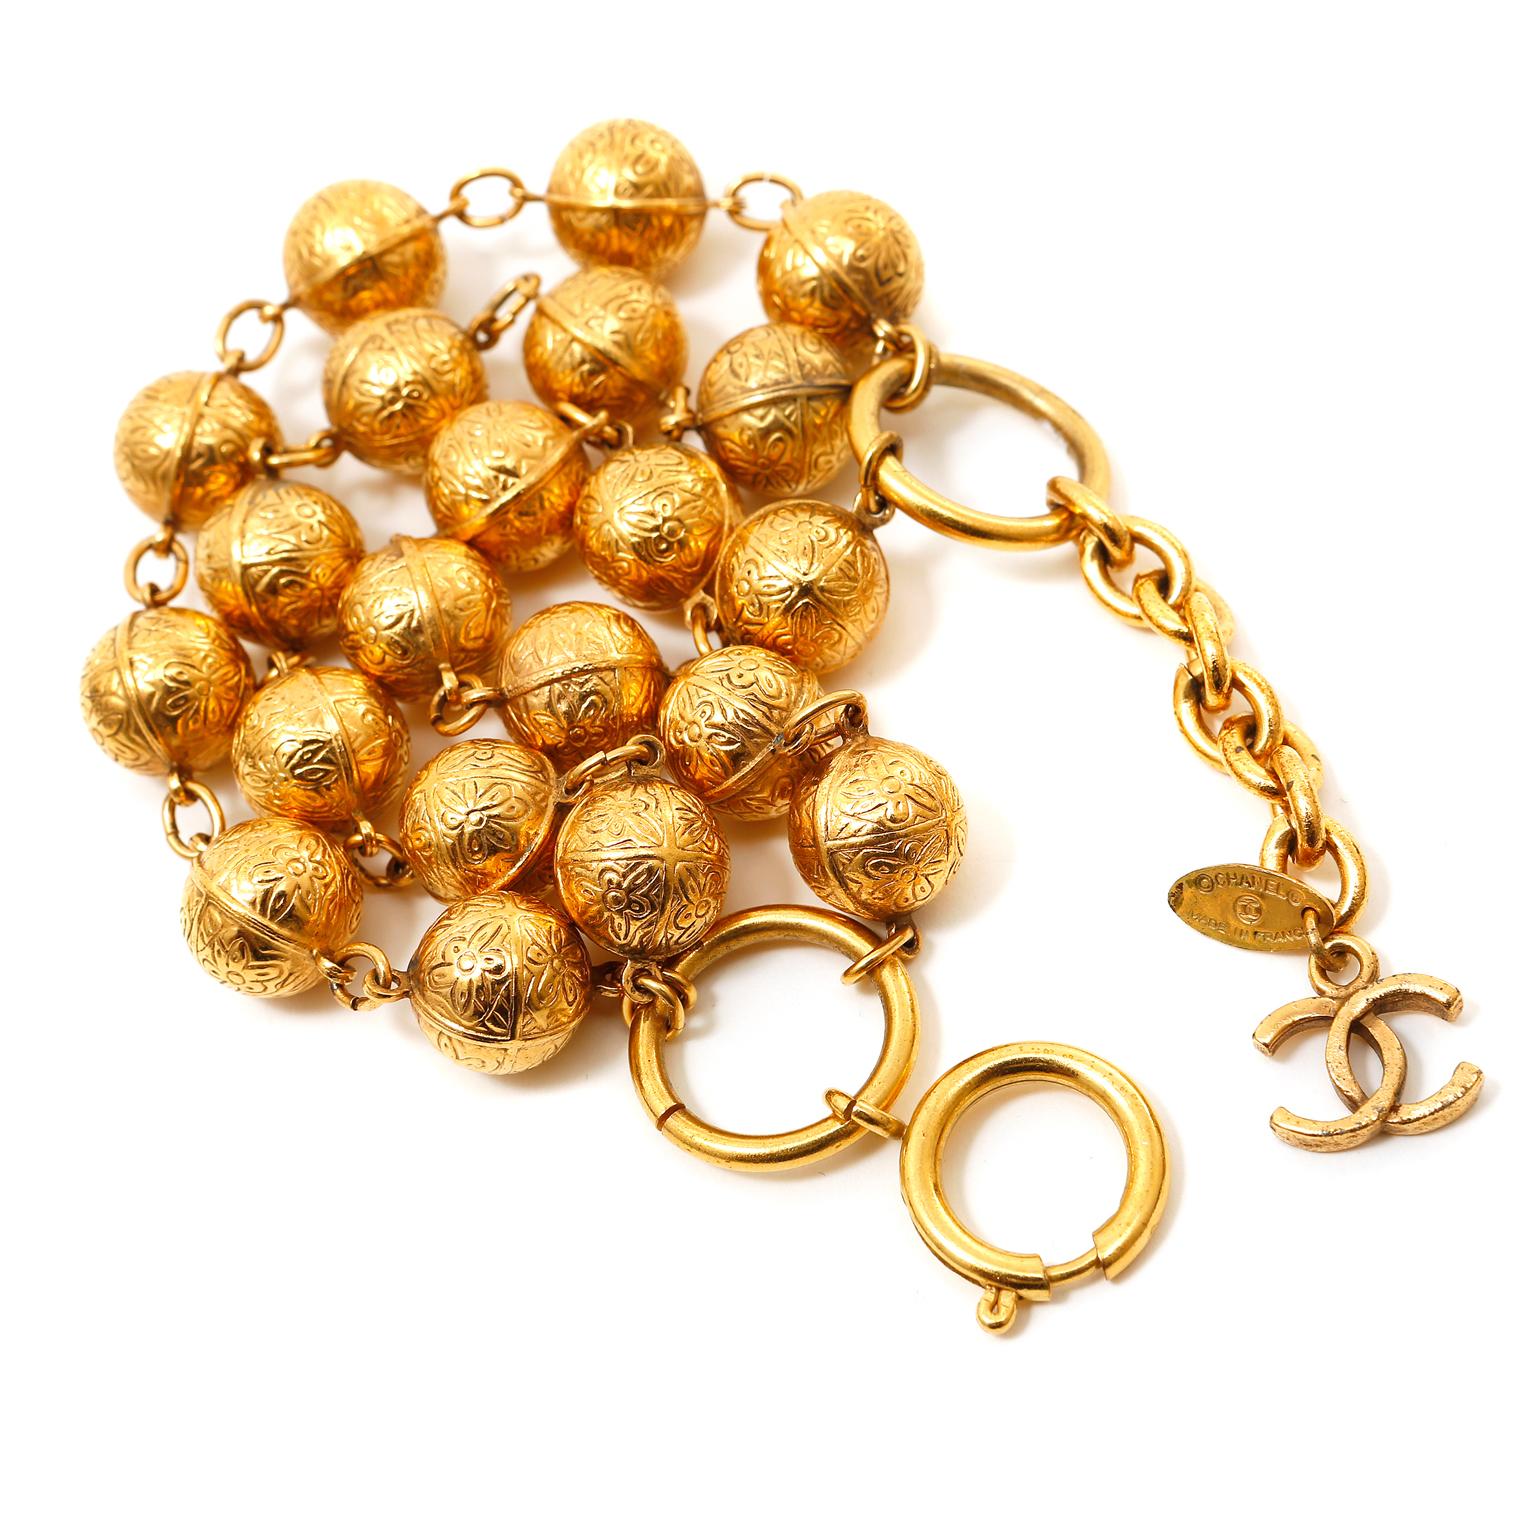 This authentic Chanel Gold Plated Triple Strand Bracelet is in excellent condition from the early 1980's.  Three strands of gold-plated flower engraved beads are strung together for a layered look.  Adjustable length 7